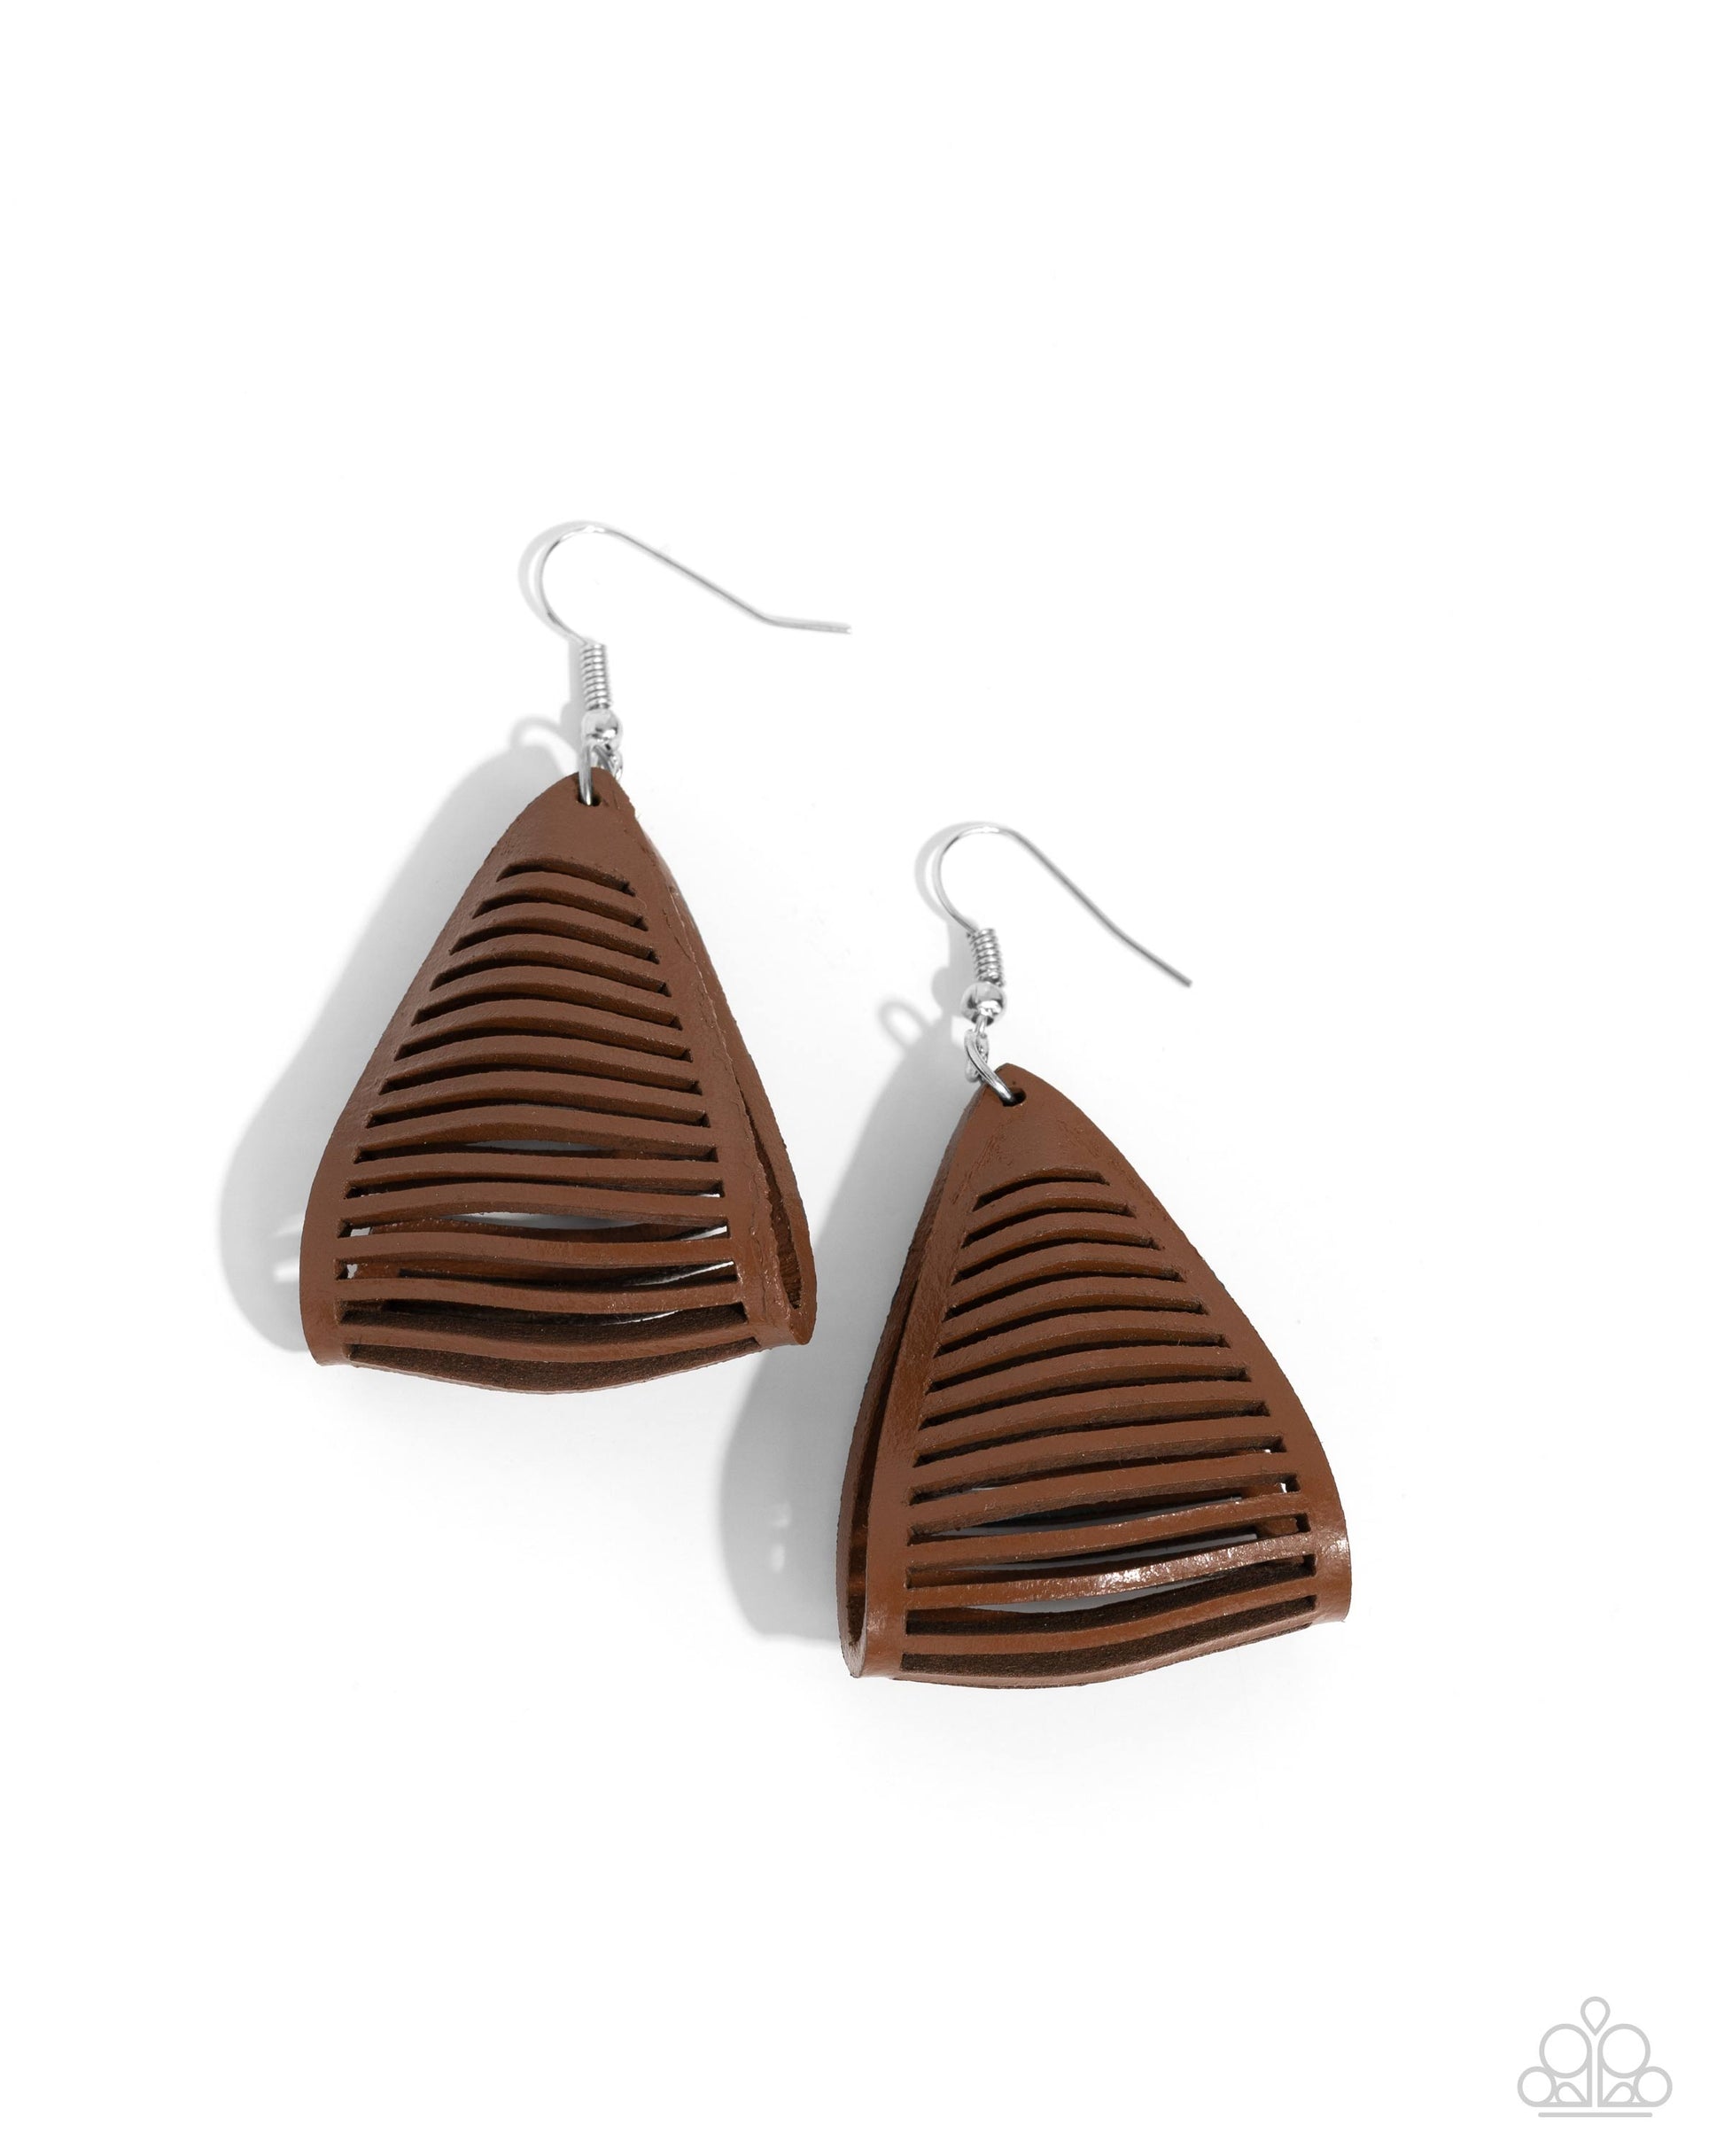 In and OUTBACK Brown Leather Earring - Paparazzi Accessories The center of a rustic brown leather frame is spliced into airy rows as it delicately folds into an edgy triangular frame, creating a seasonal fashion. Earring attaches to a standard fishhook fitting. Sold as one pair of earrings. SKU: P5SE-BNXX-182XX